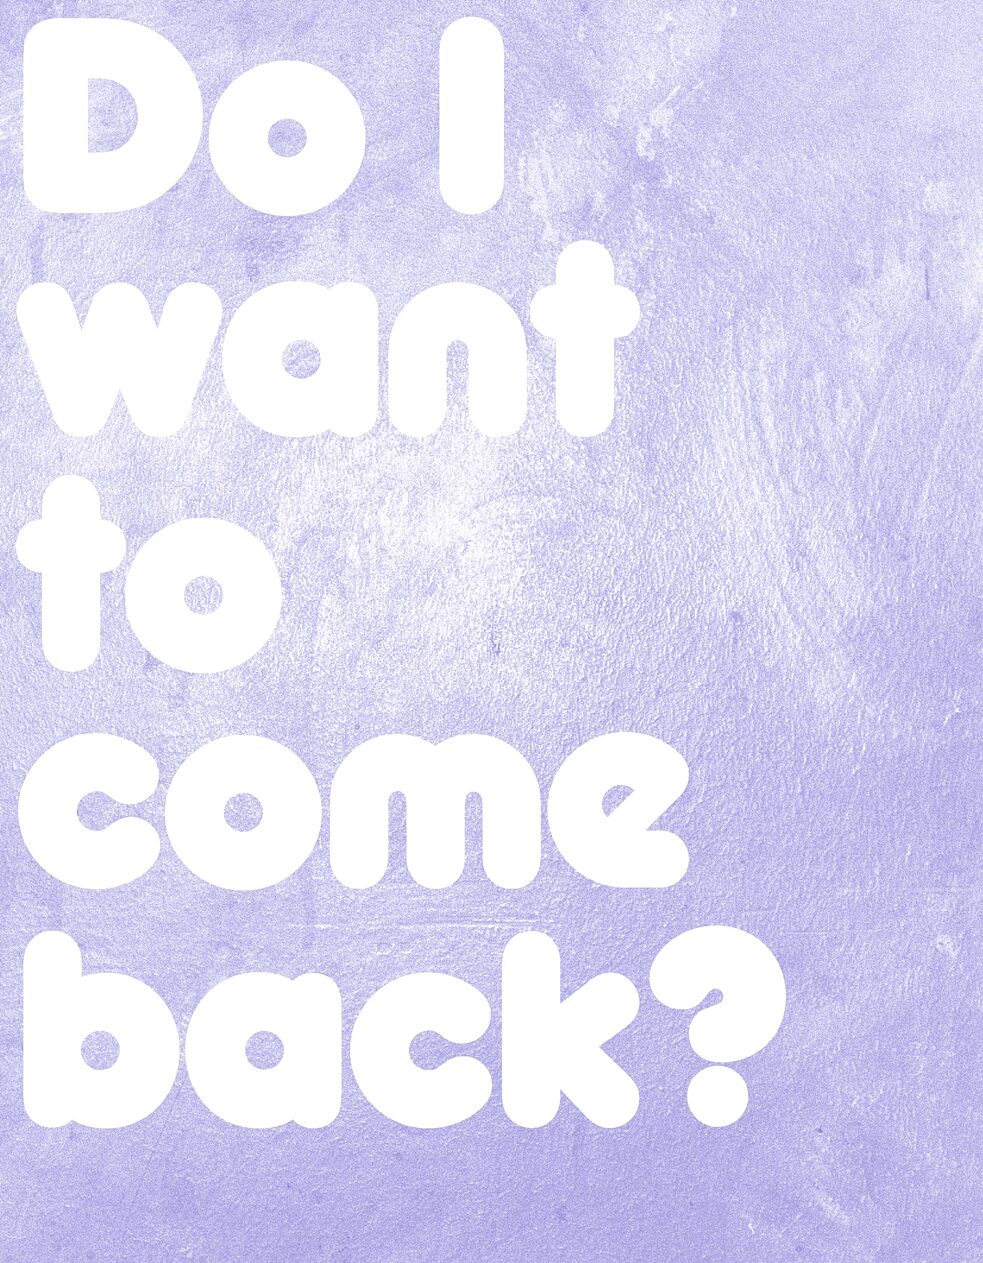 Do I want to come back (Frage 4)